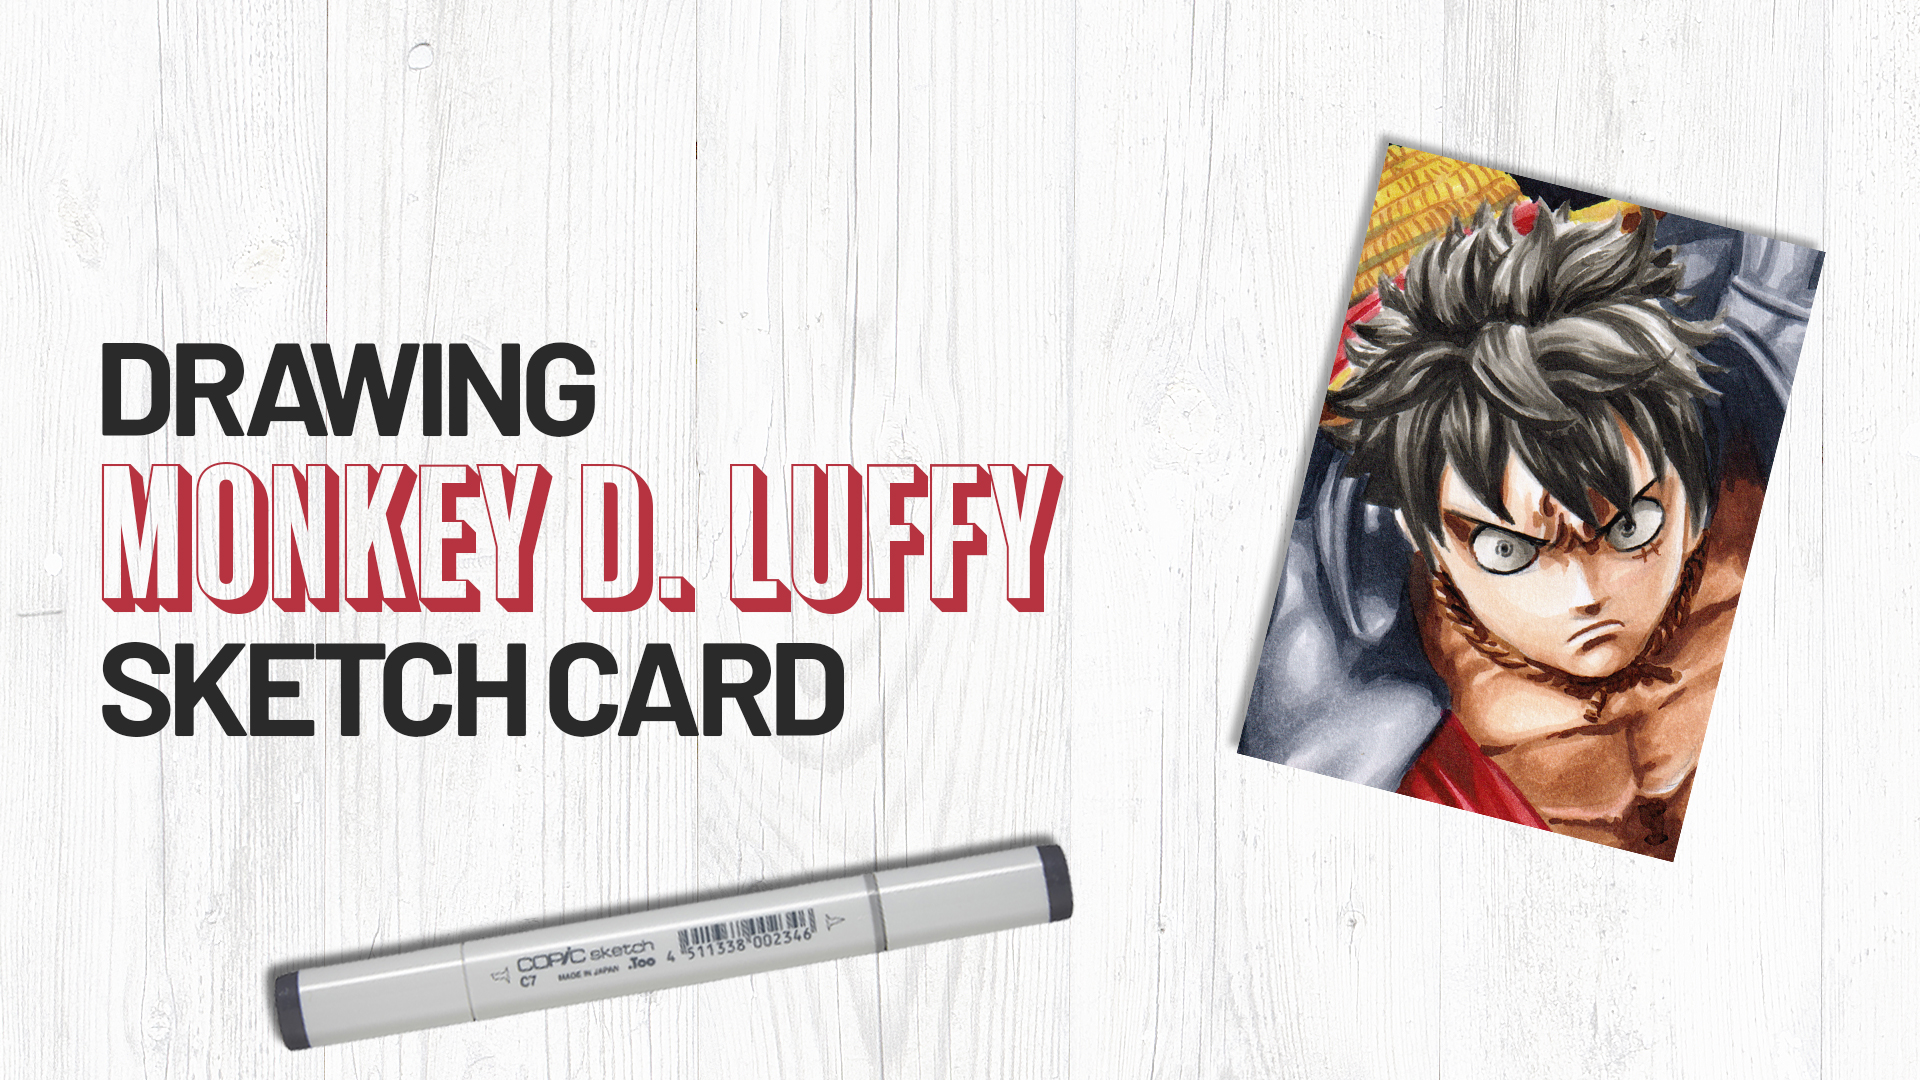 Drawing Monkey D. Luffy from One Piece Sketch Card by Duke